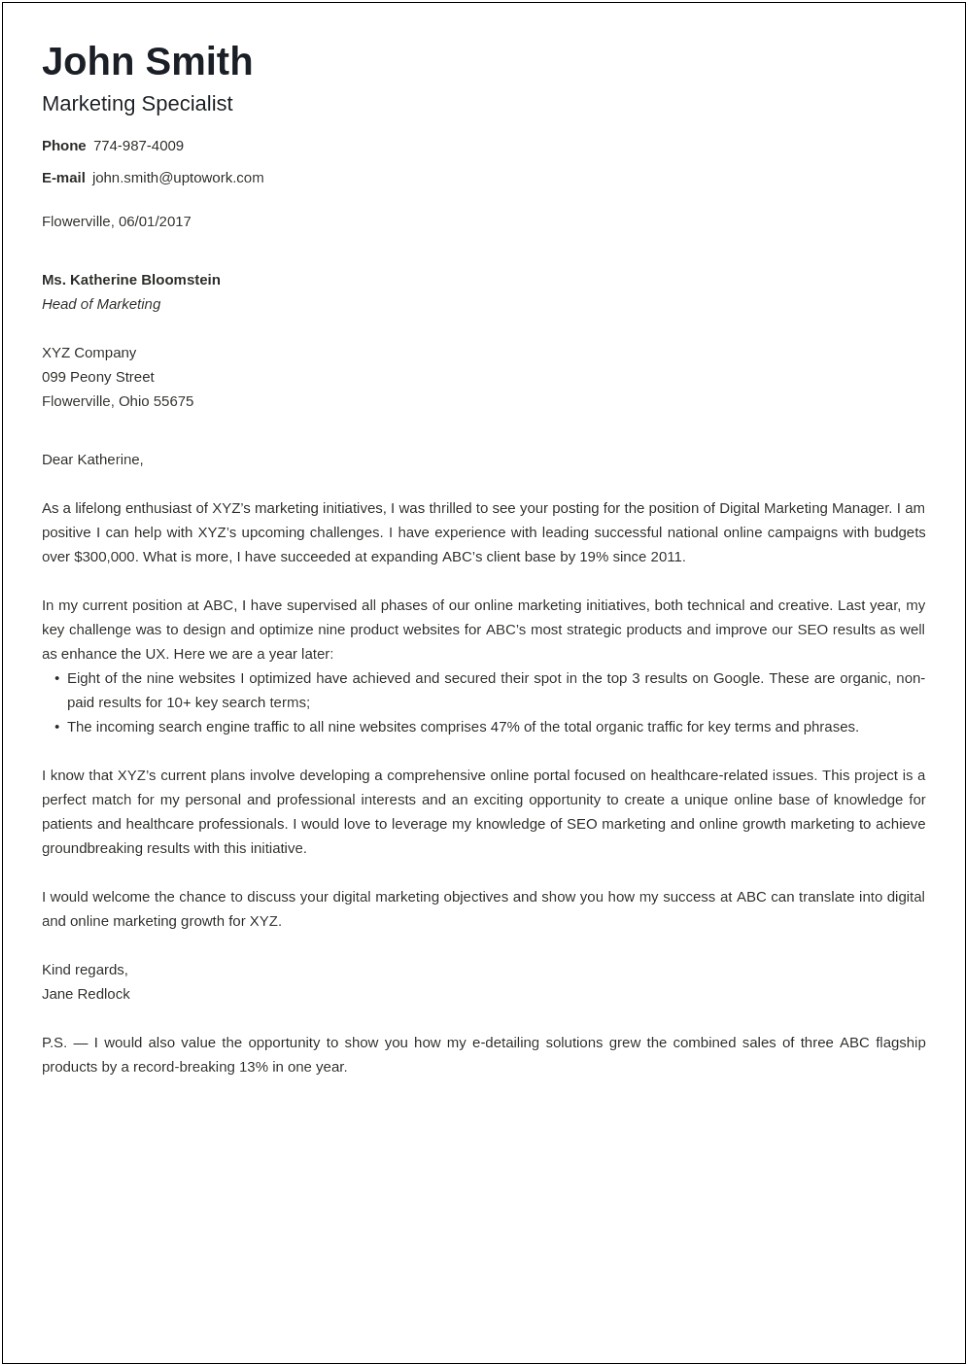 Example Of A Cover Letter For Job Resume